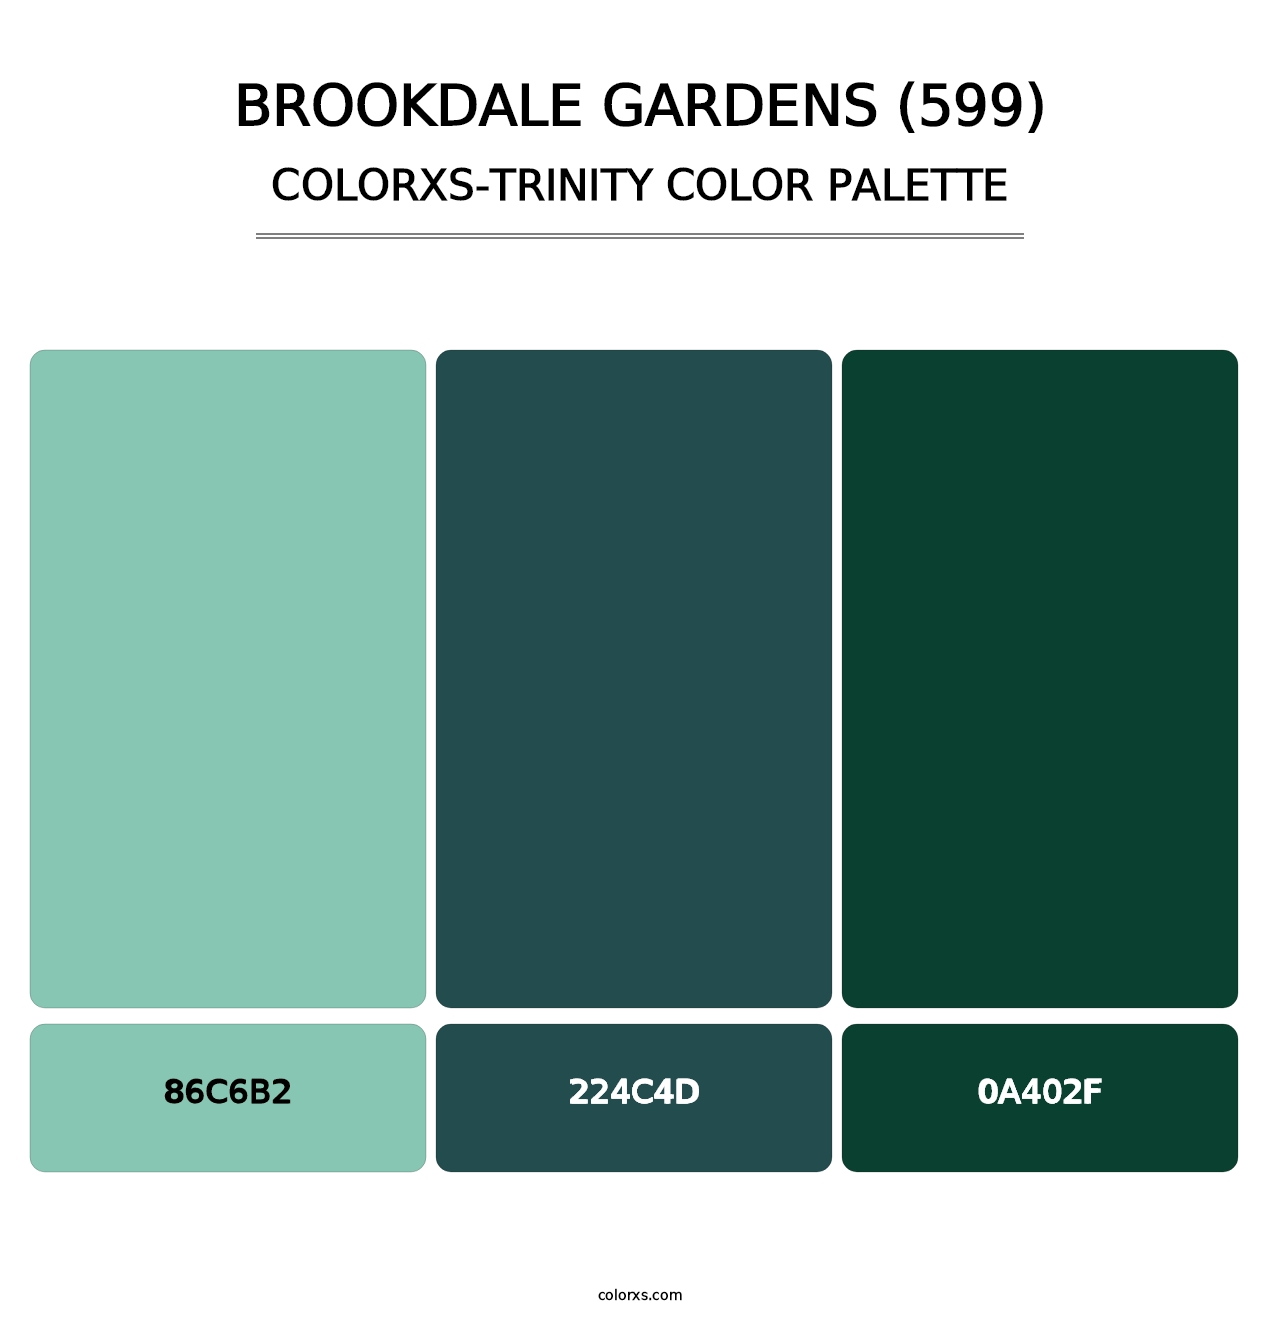 Brookdale Gardens (599) - Colorxs Trinity Palette